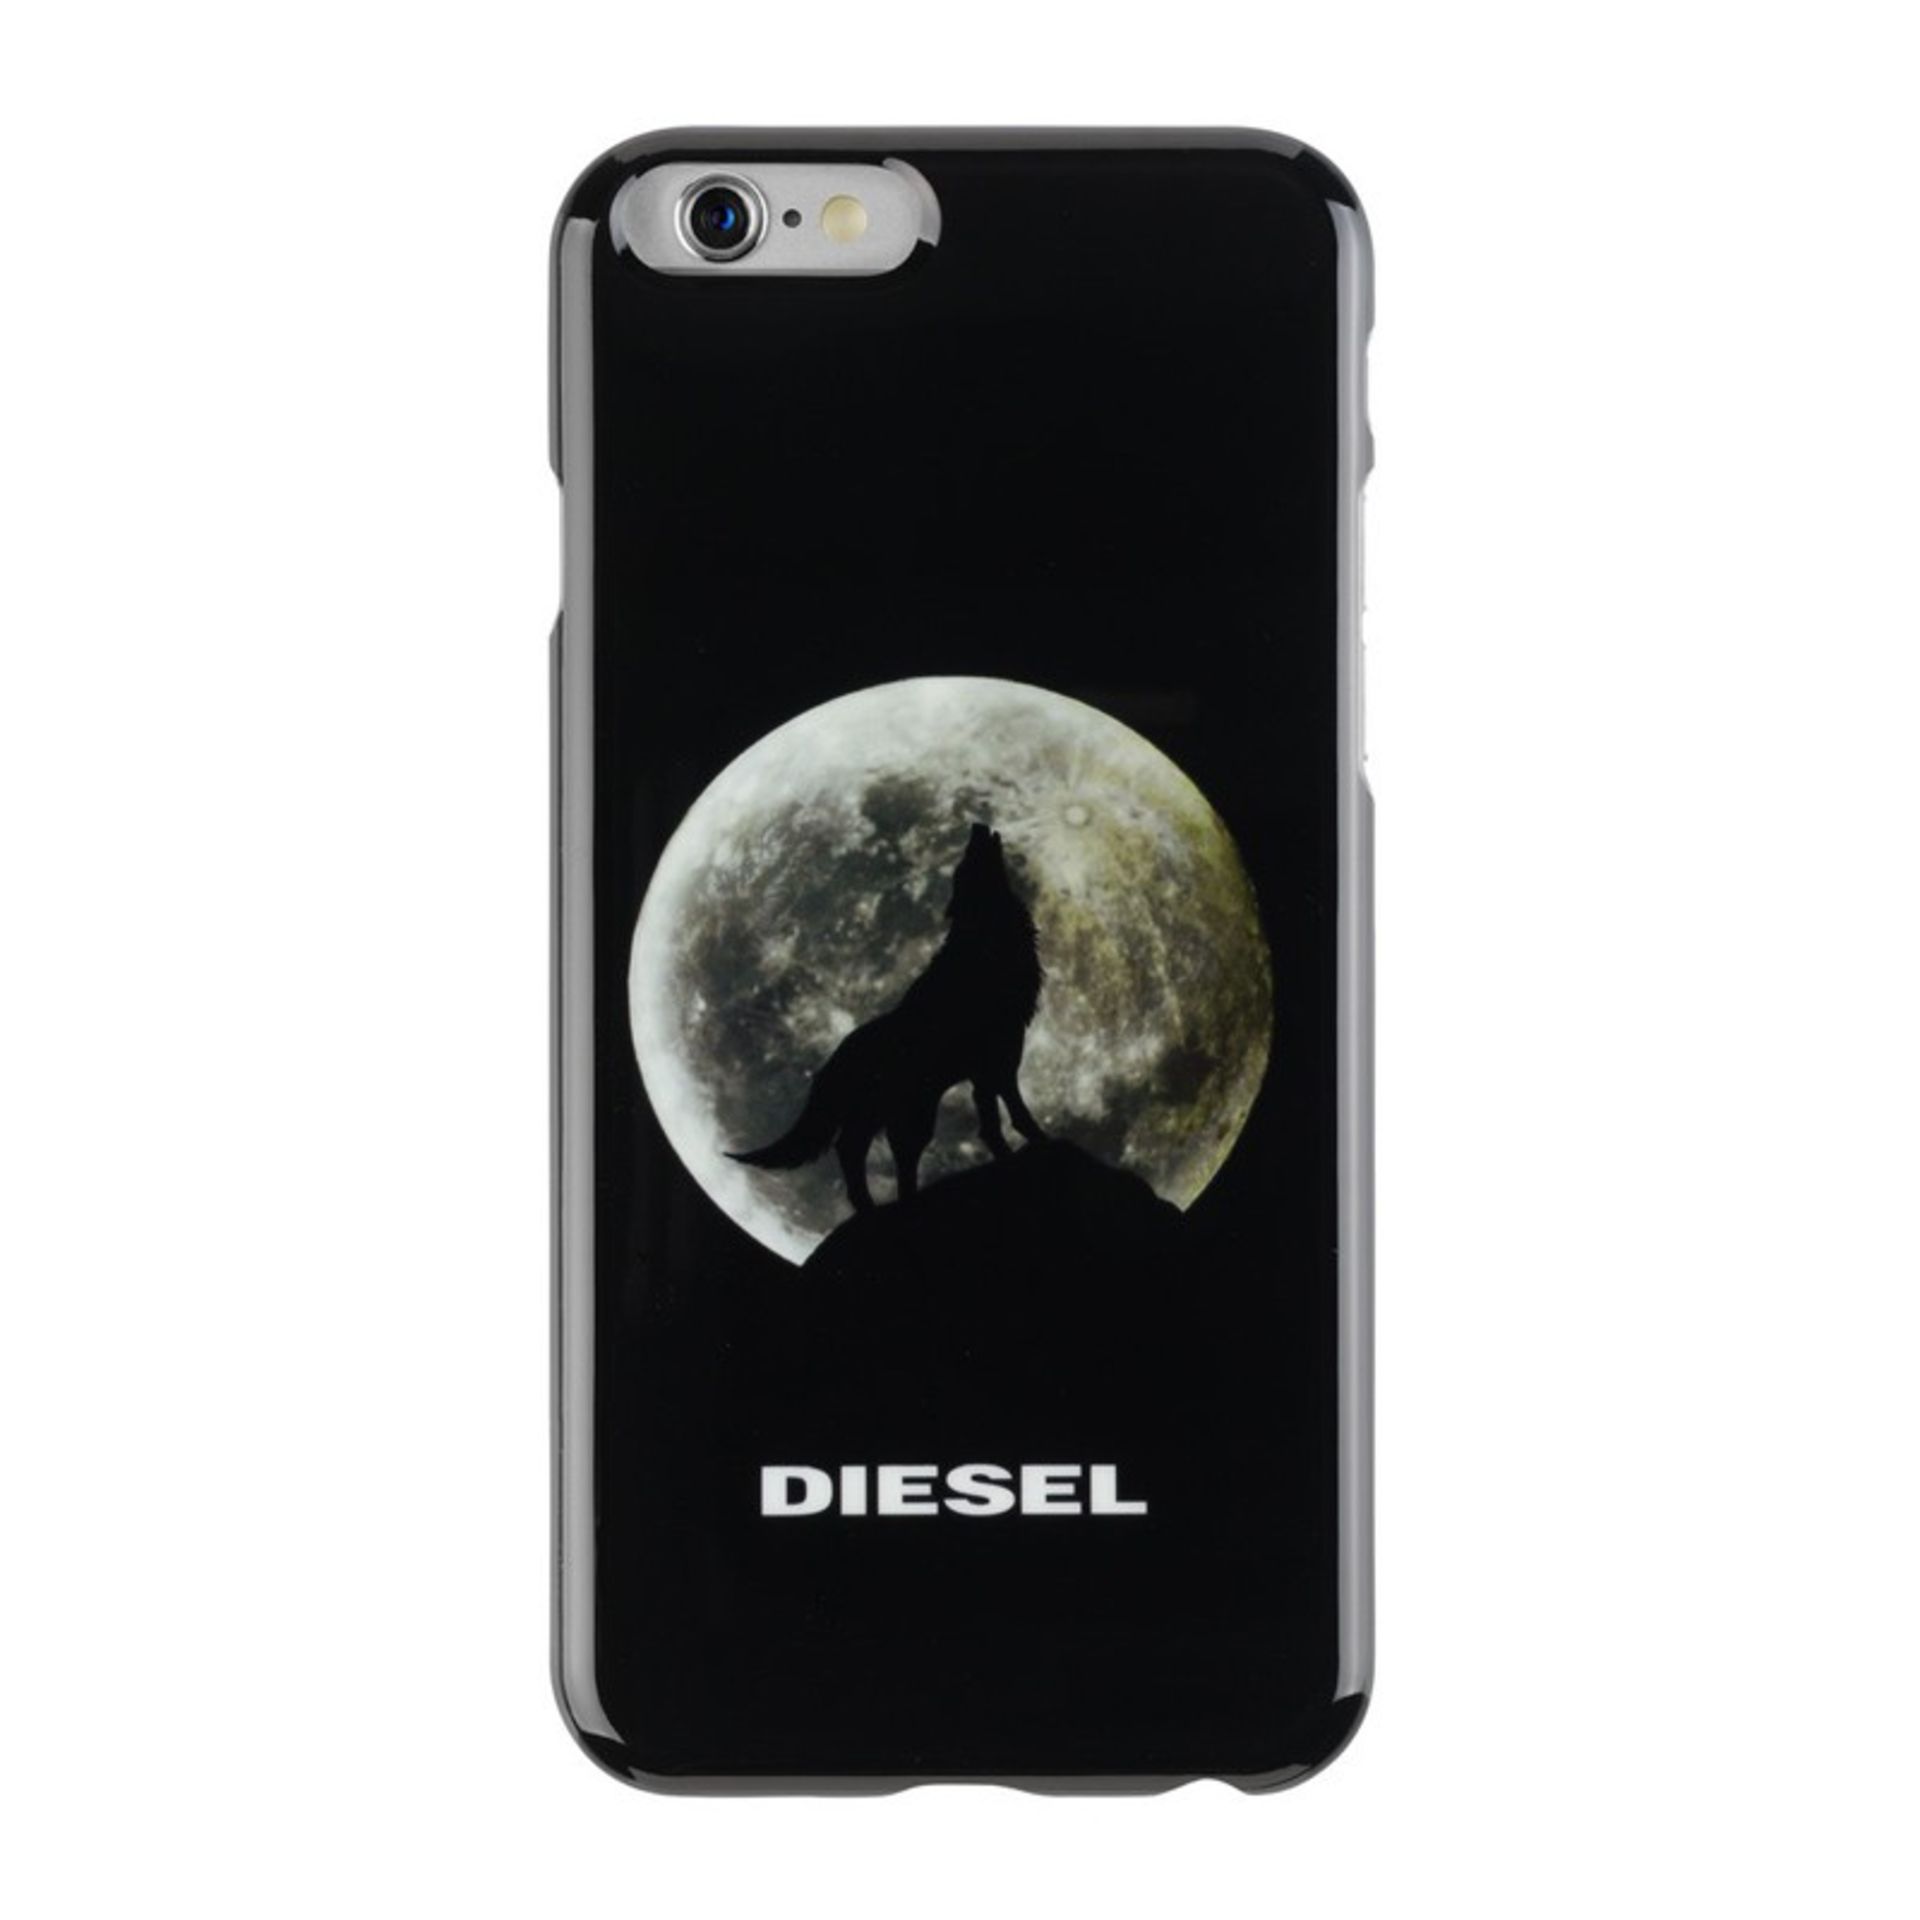 V Brand New A Large Box Containing Approx 280 Diesel Snap Case For iPhone 6